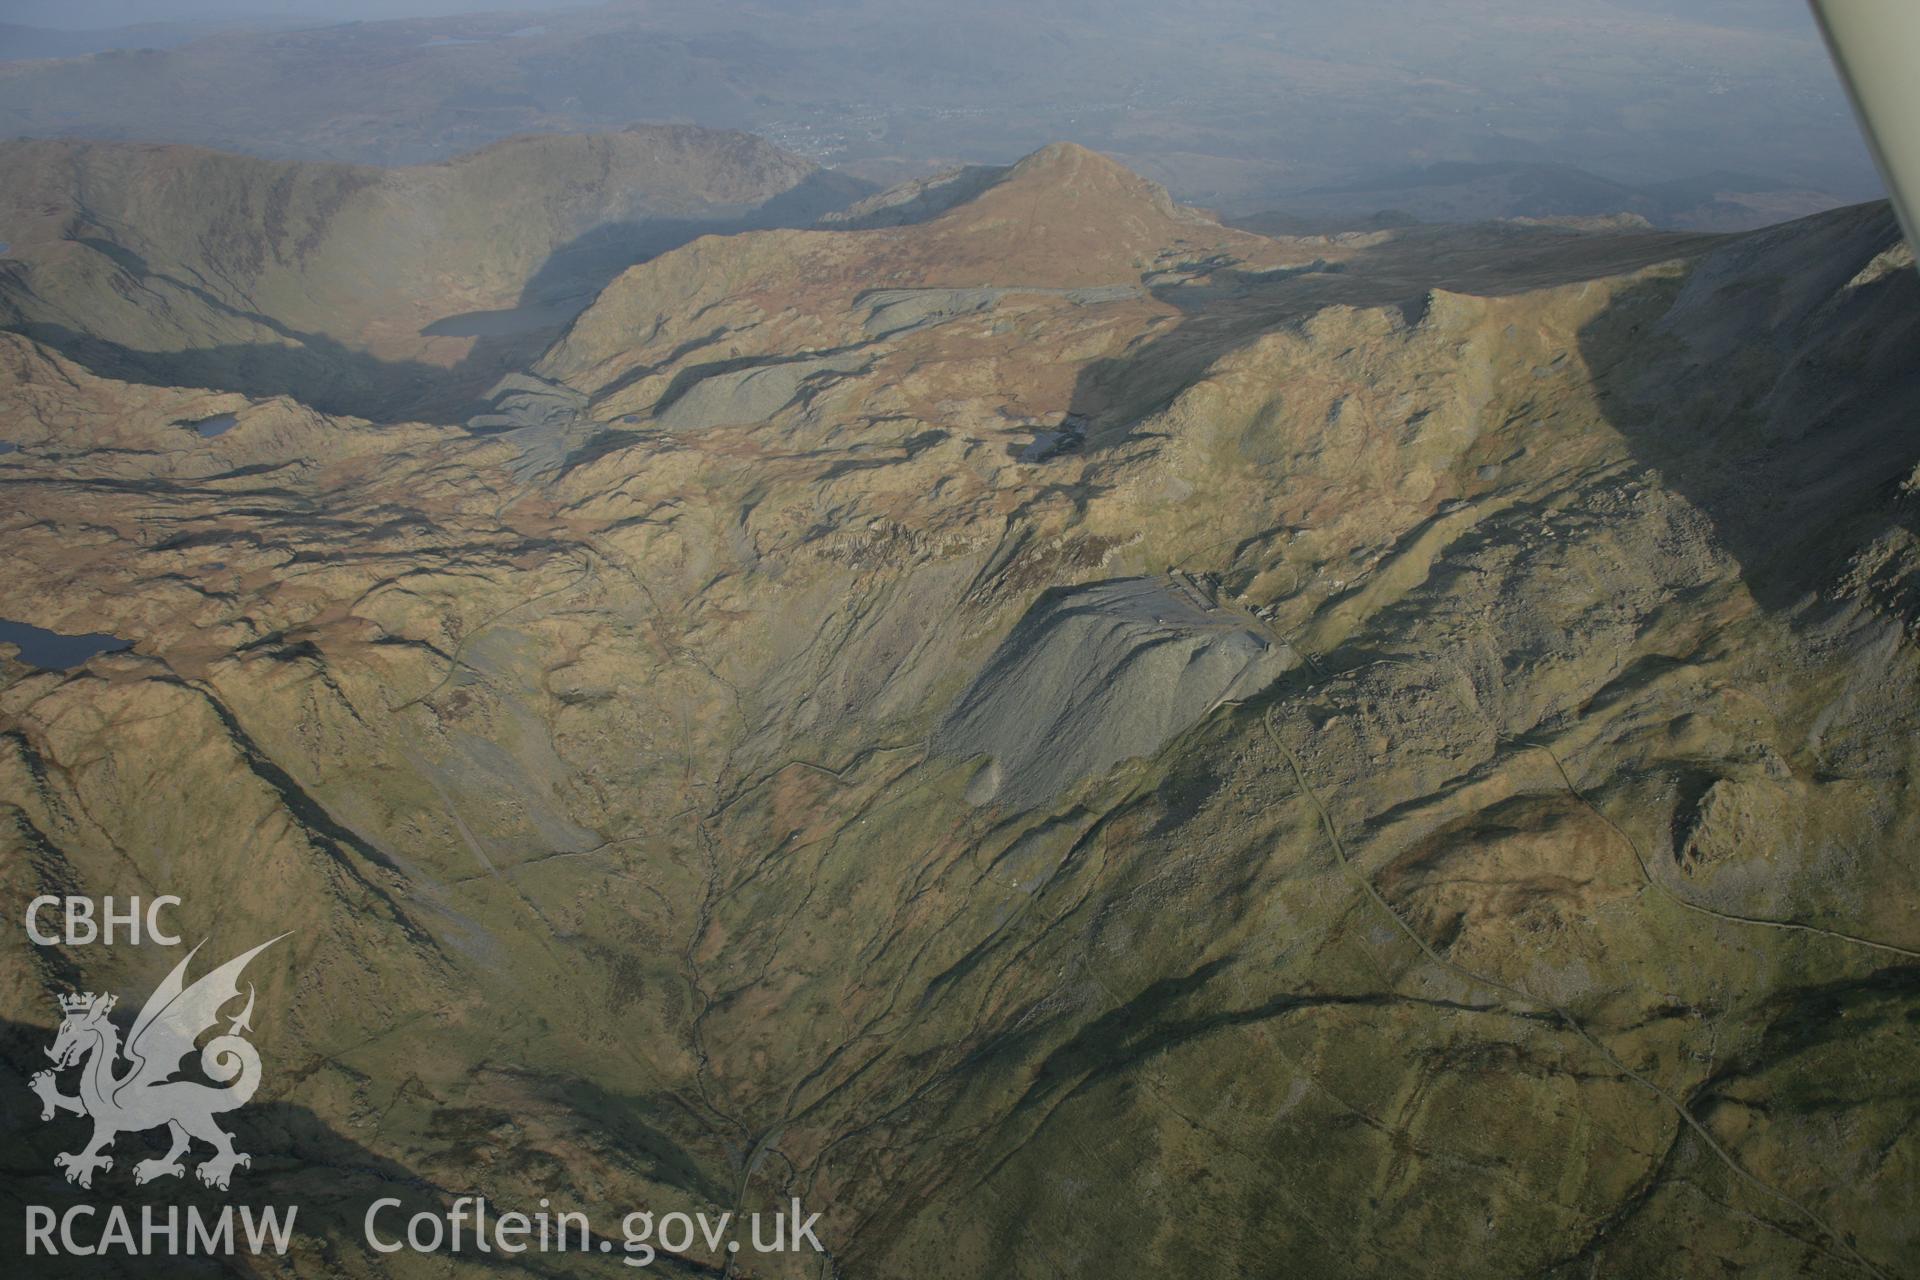 RCAHMW digital colour oblique photograph of Croesor Slate Quarry from the west. Taken on 20/03/2005 by T.G. Driver.